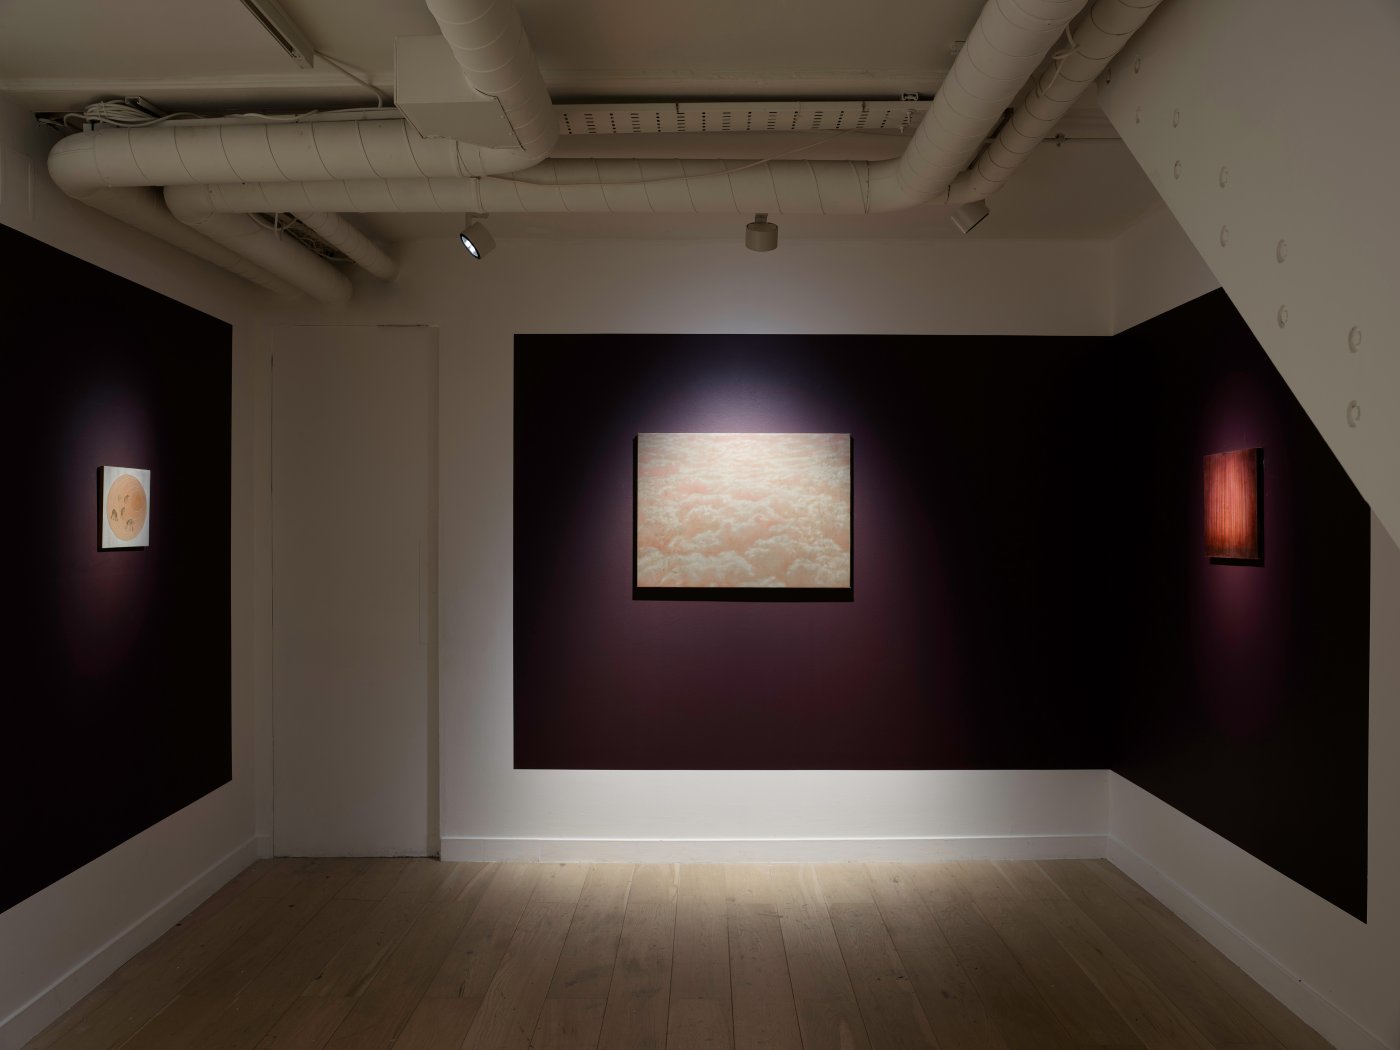 Installation image for Melanie Smith: Tickled Pink, Green with Envy, at Parafin